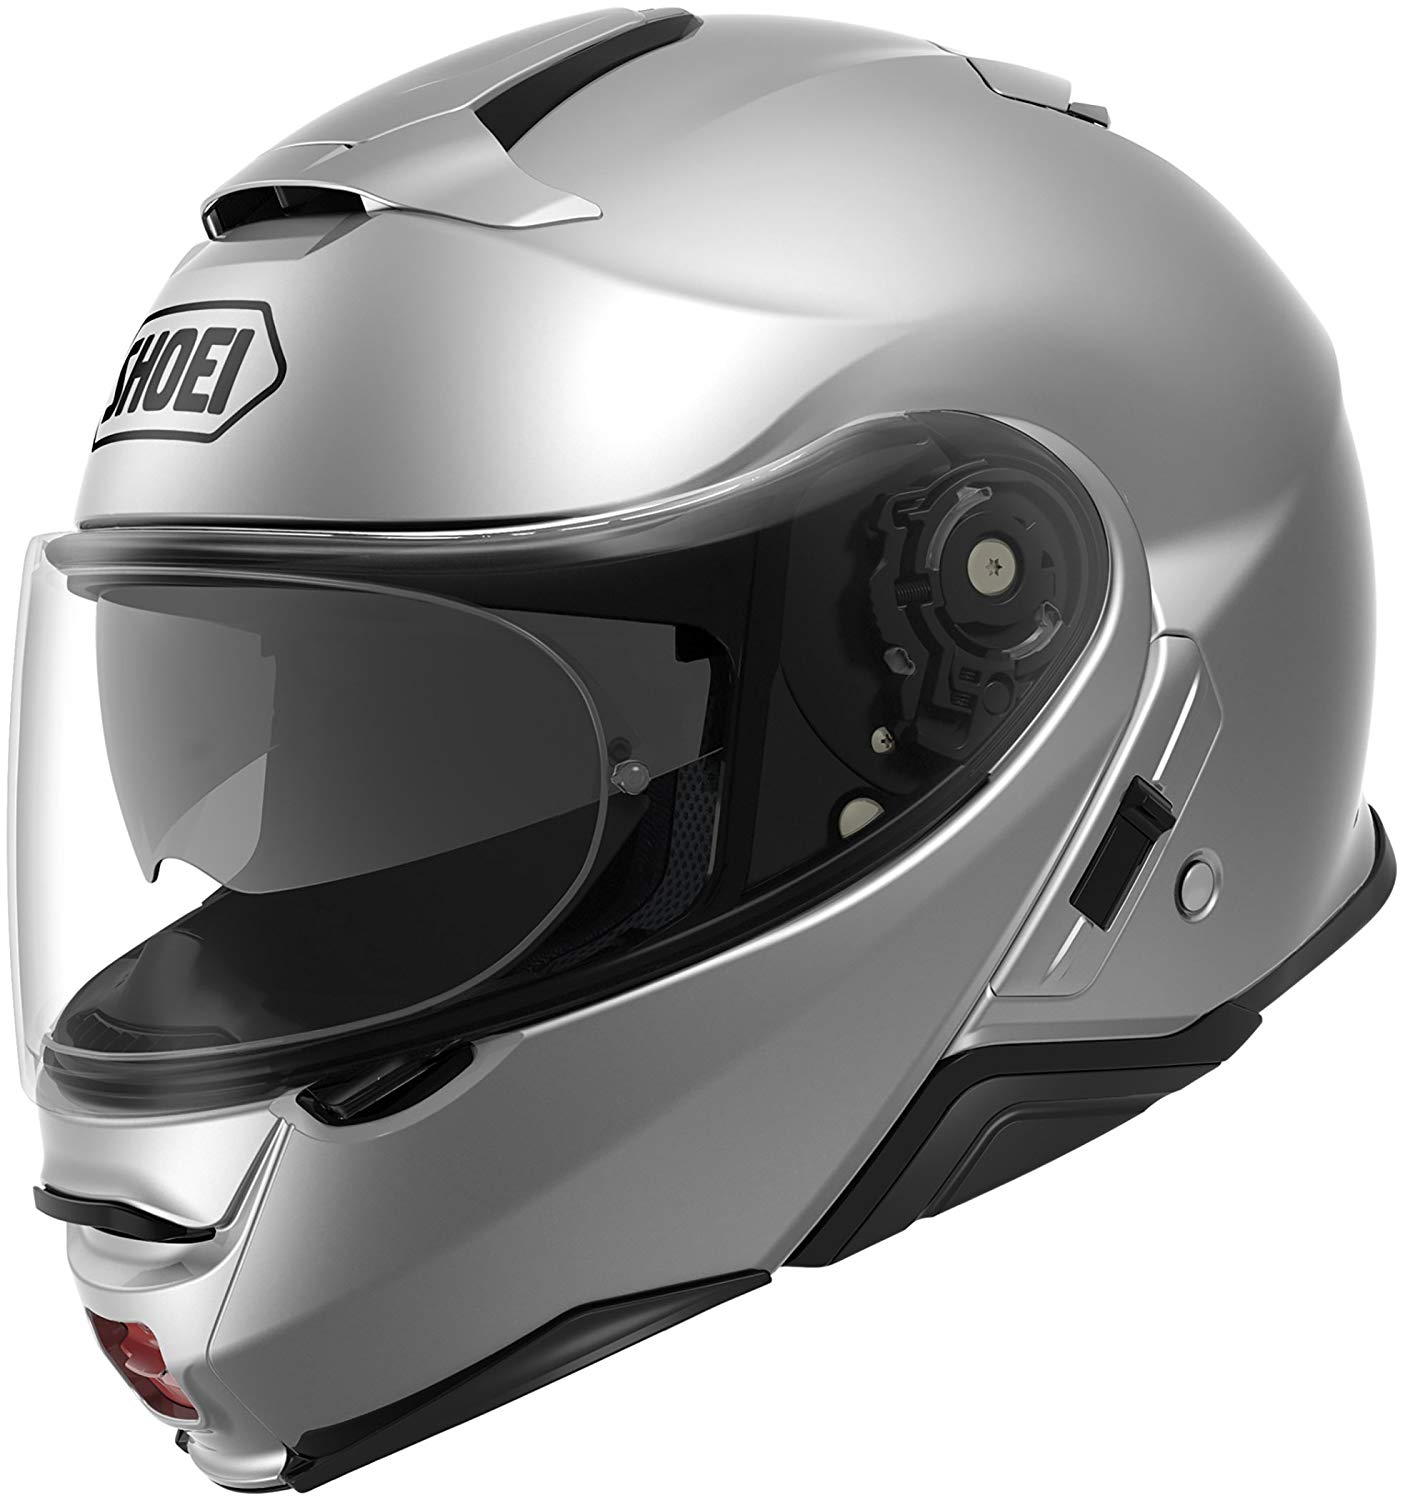 Top 8 Modular Motorcycle Helmets Which one is the BEST?